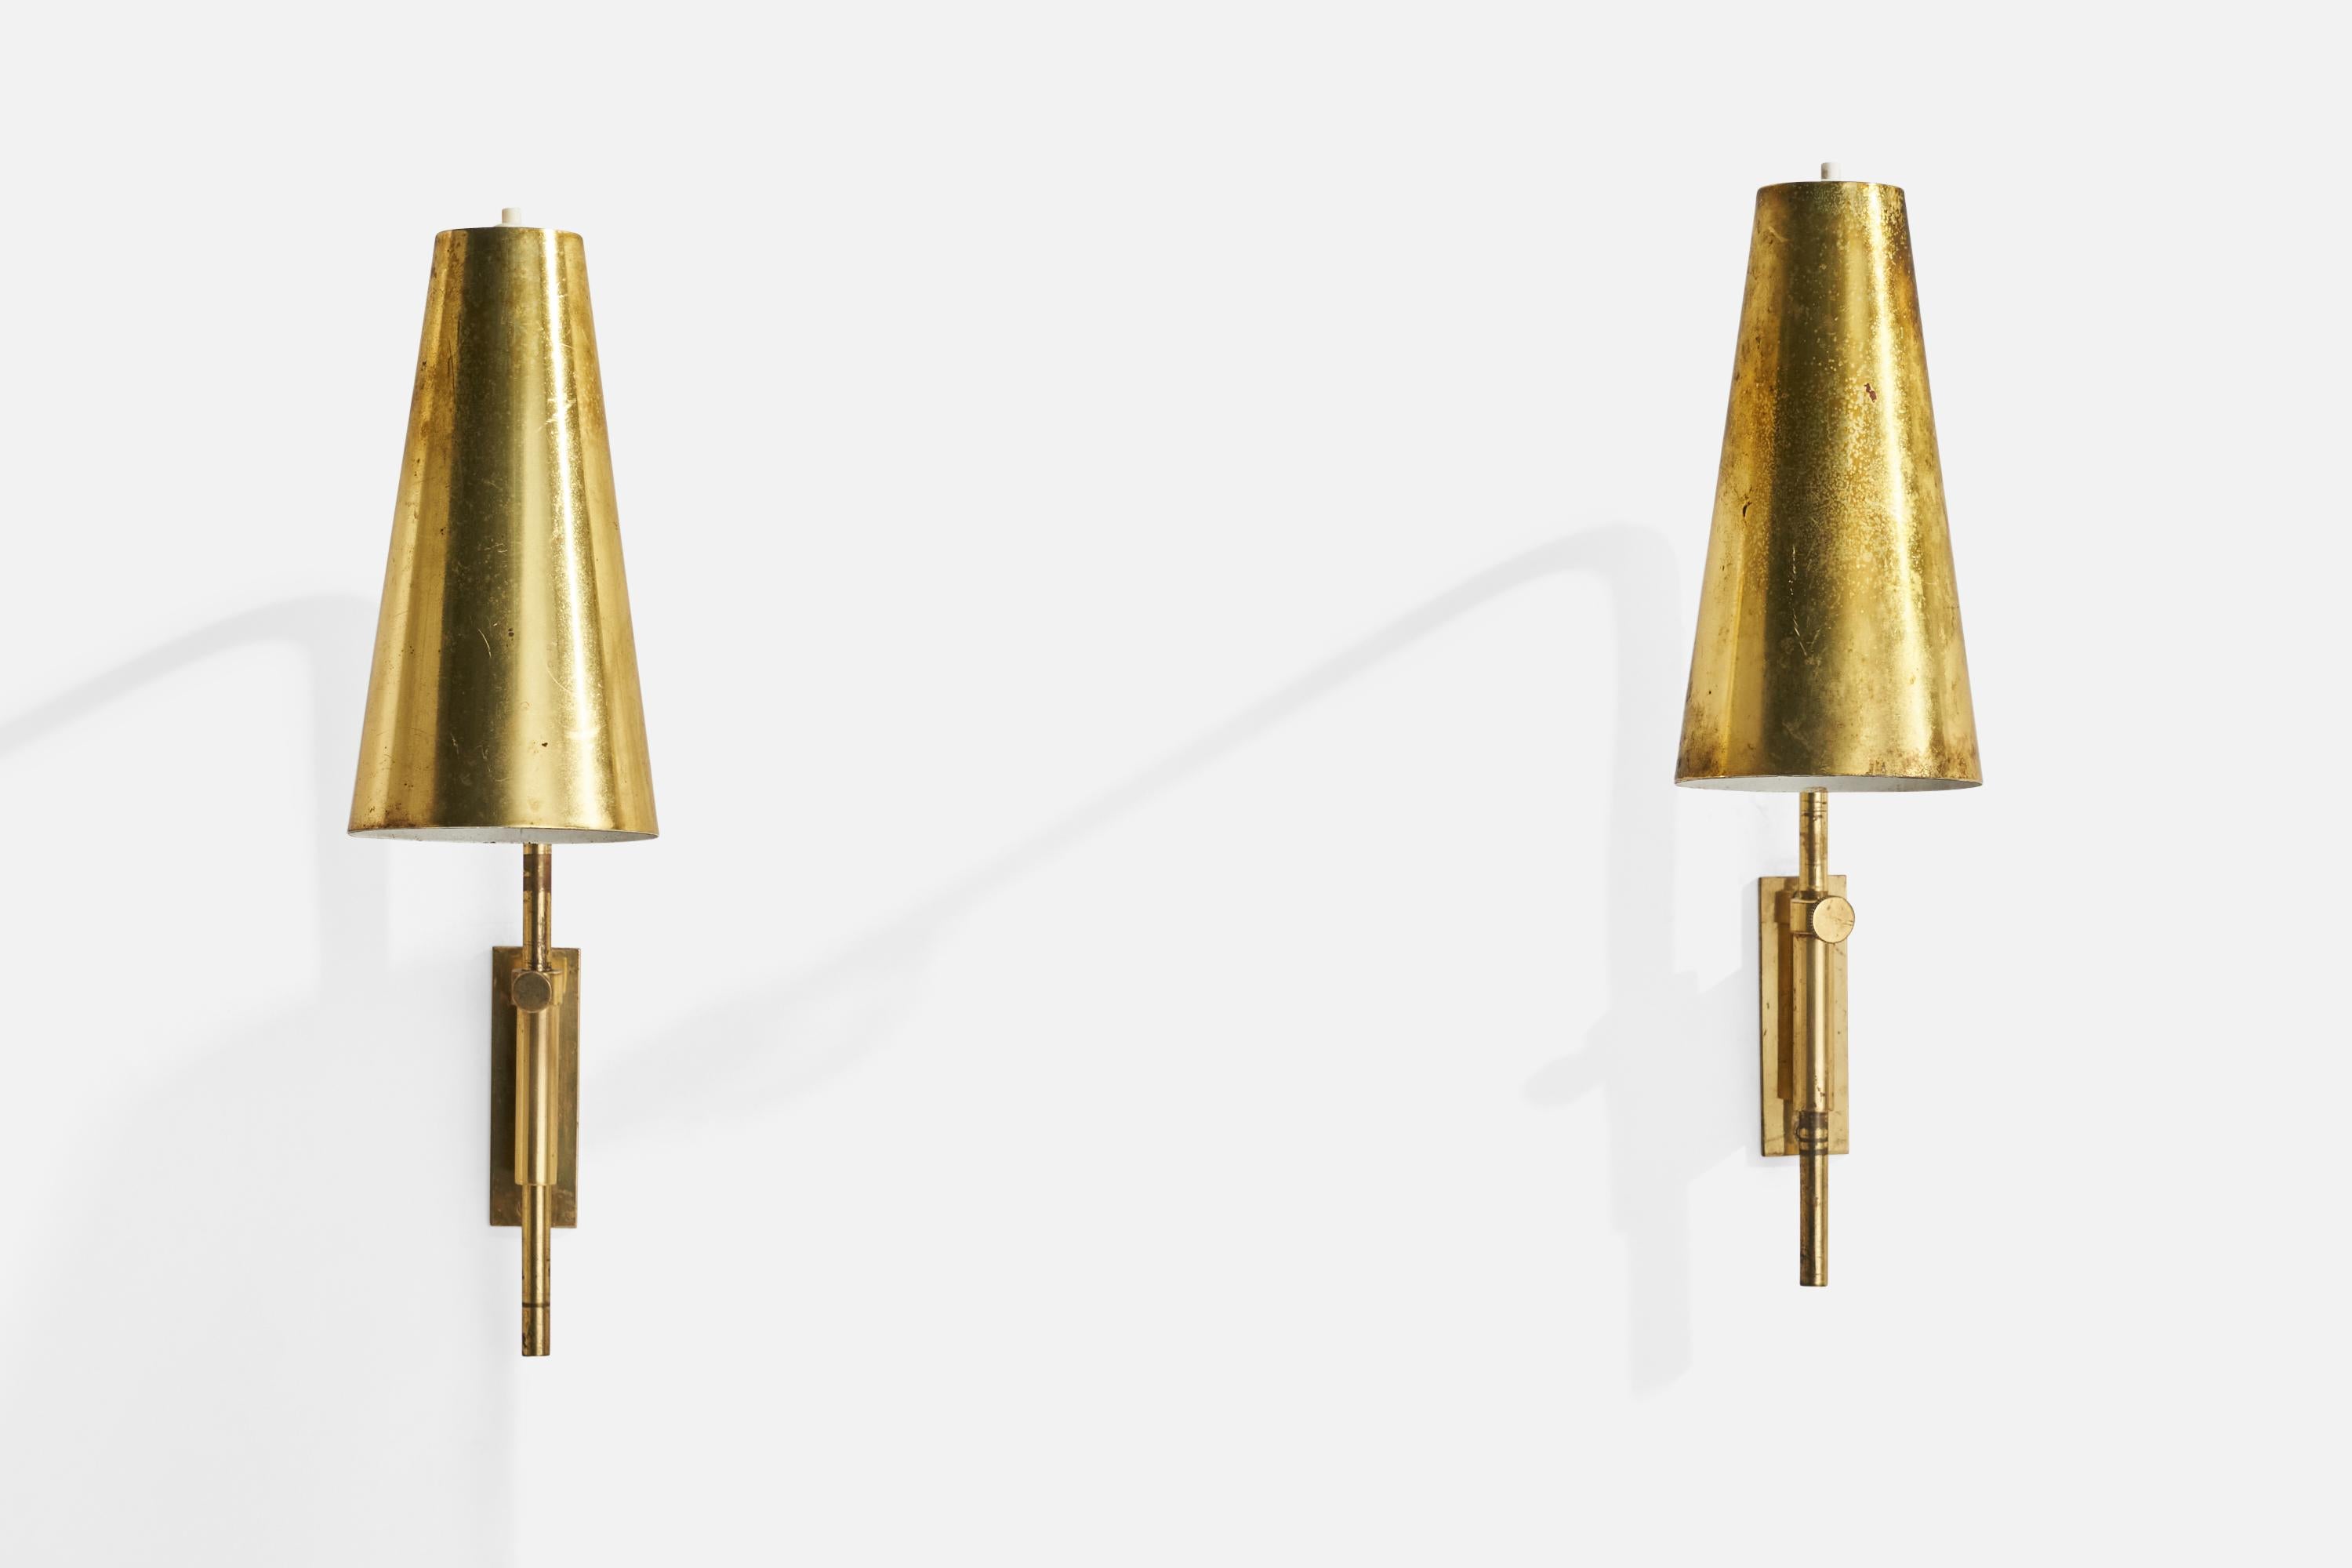 Finnish Paavo Tynell, Wall Lights, Brass, Finland, 1950s For Sale